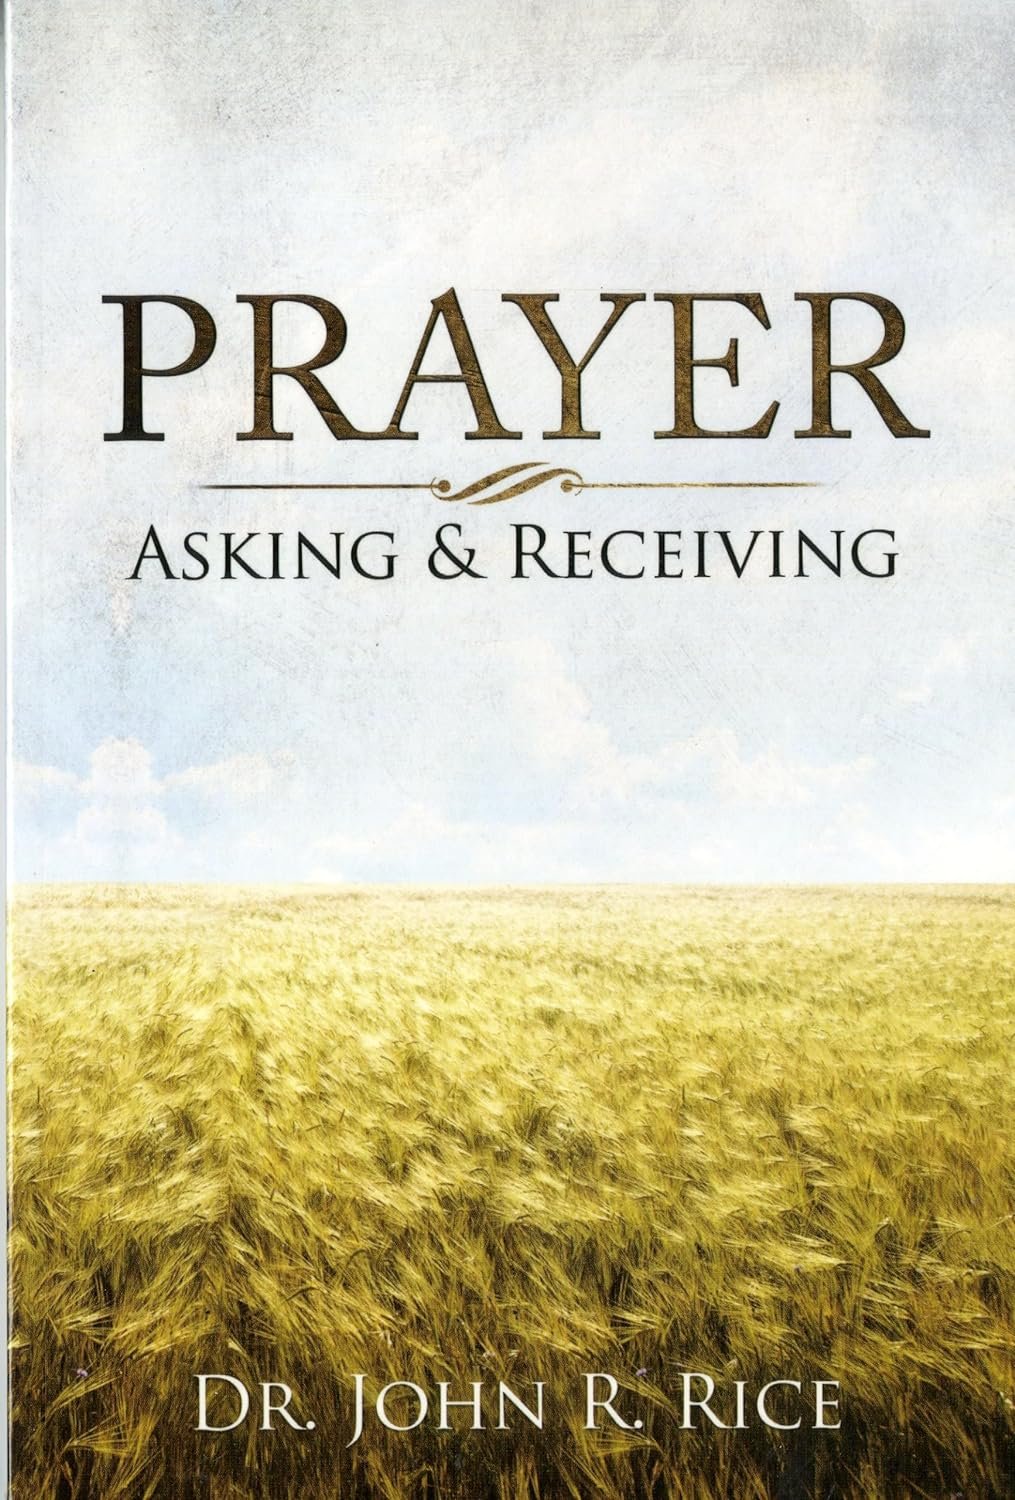 “Prayer: Asking and Receiving” - by John R. Rice